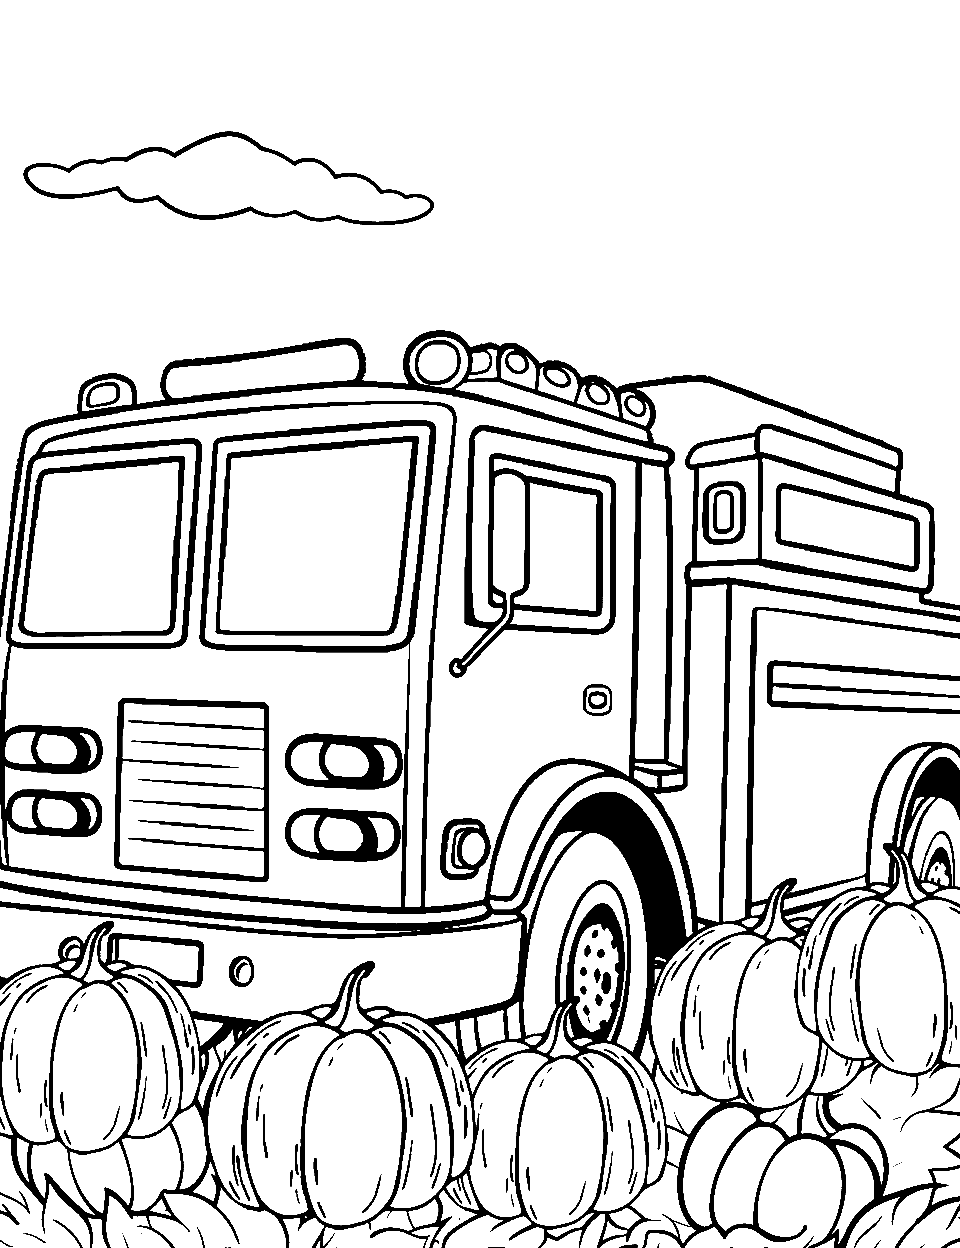 Pumpkin Patch Fire Truck Coloring Page - A vintage fire truck near a field with pumpkins.